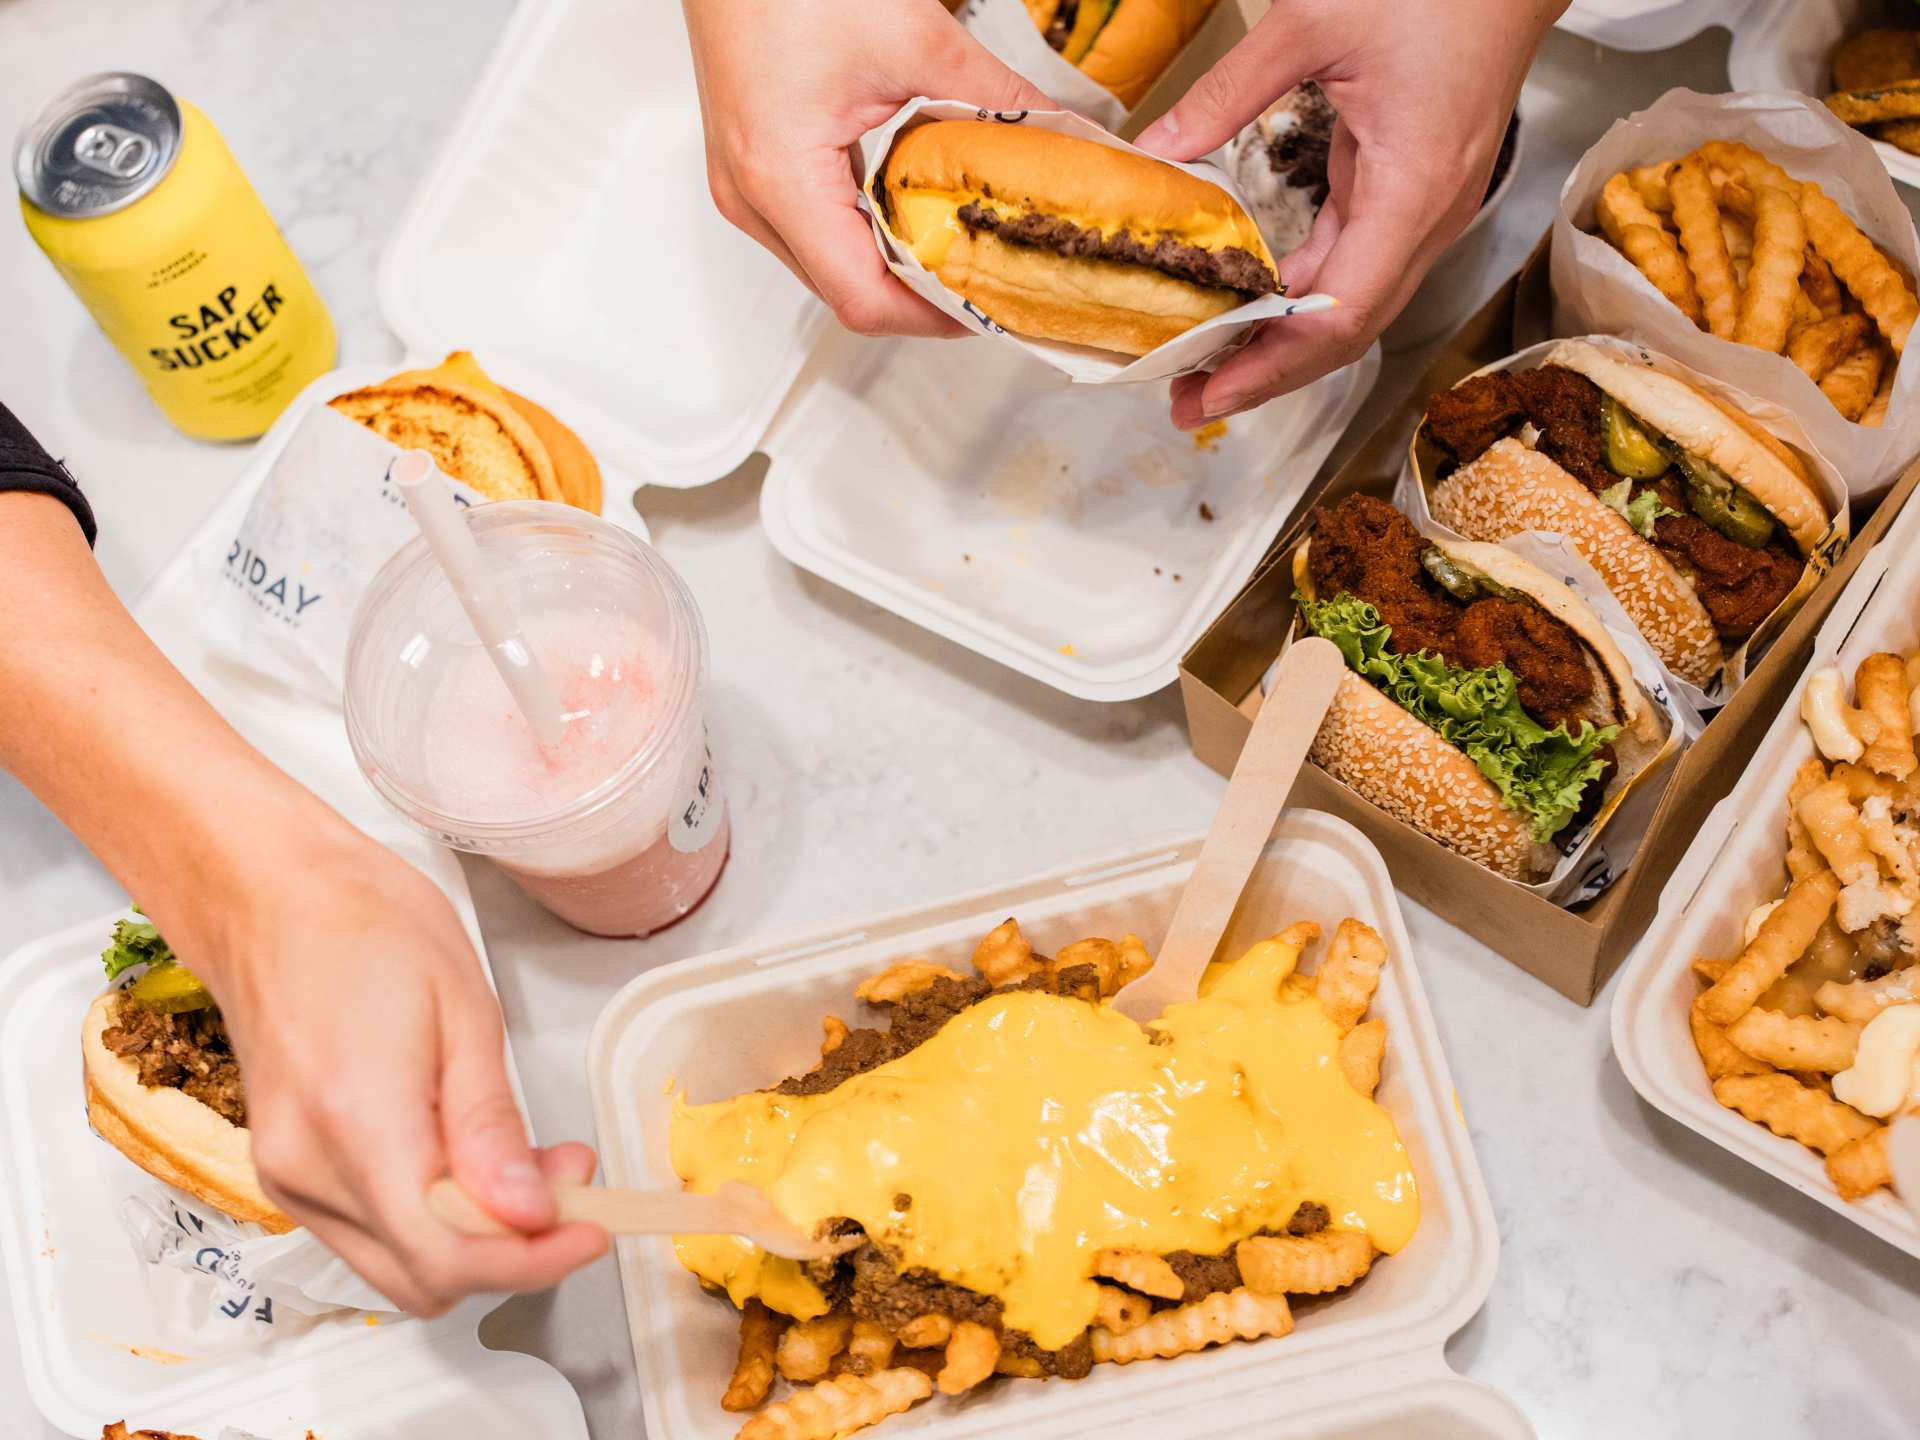 New Toronto restaurants | Cheese covered fries, poutine, burgers, fried chicken sandwiches and a milkshake at Friday Burger Company